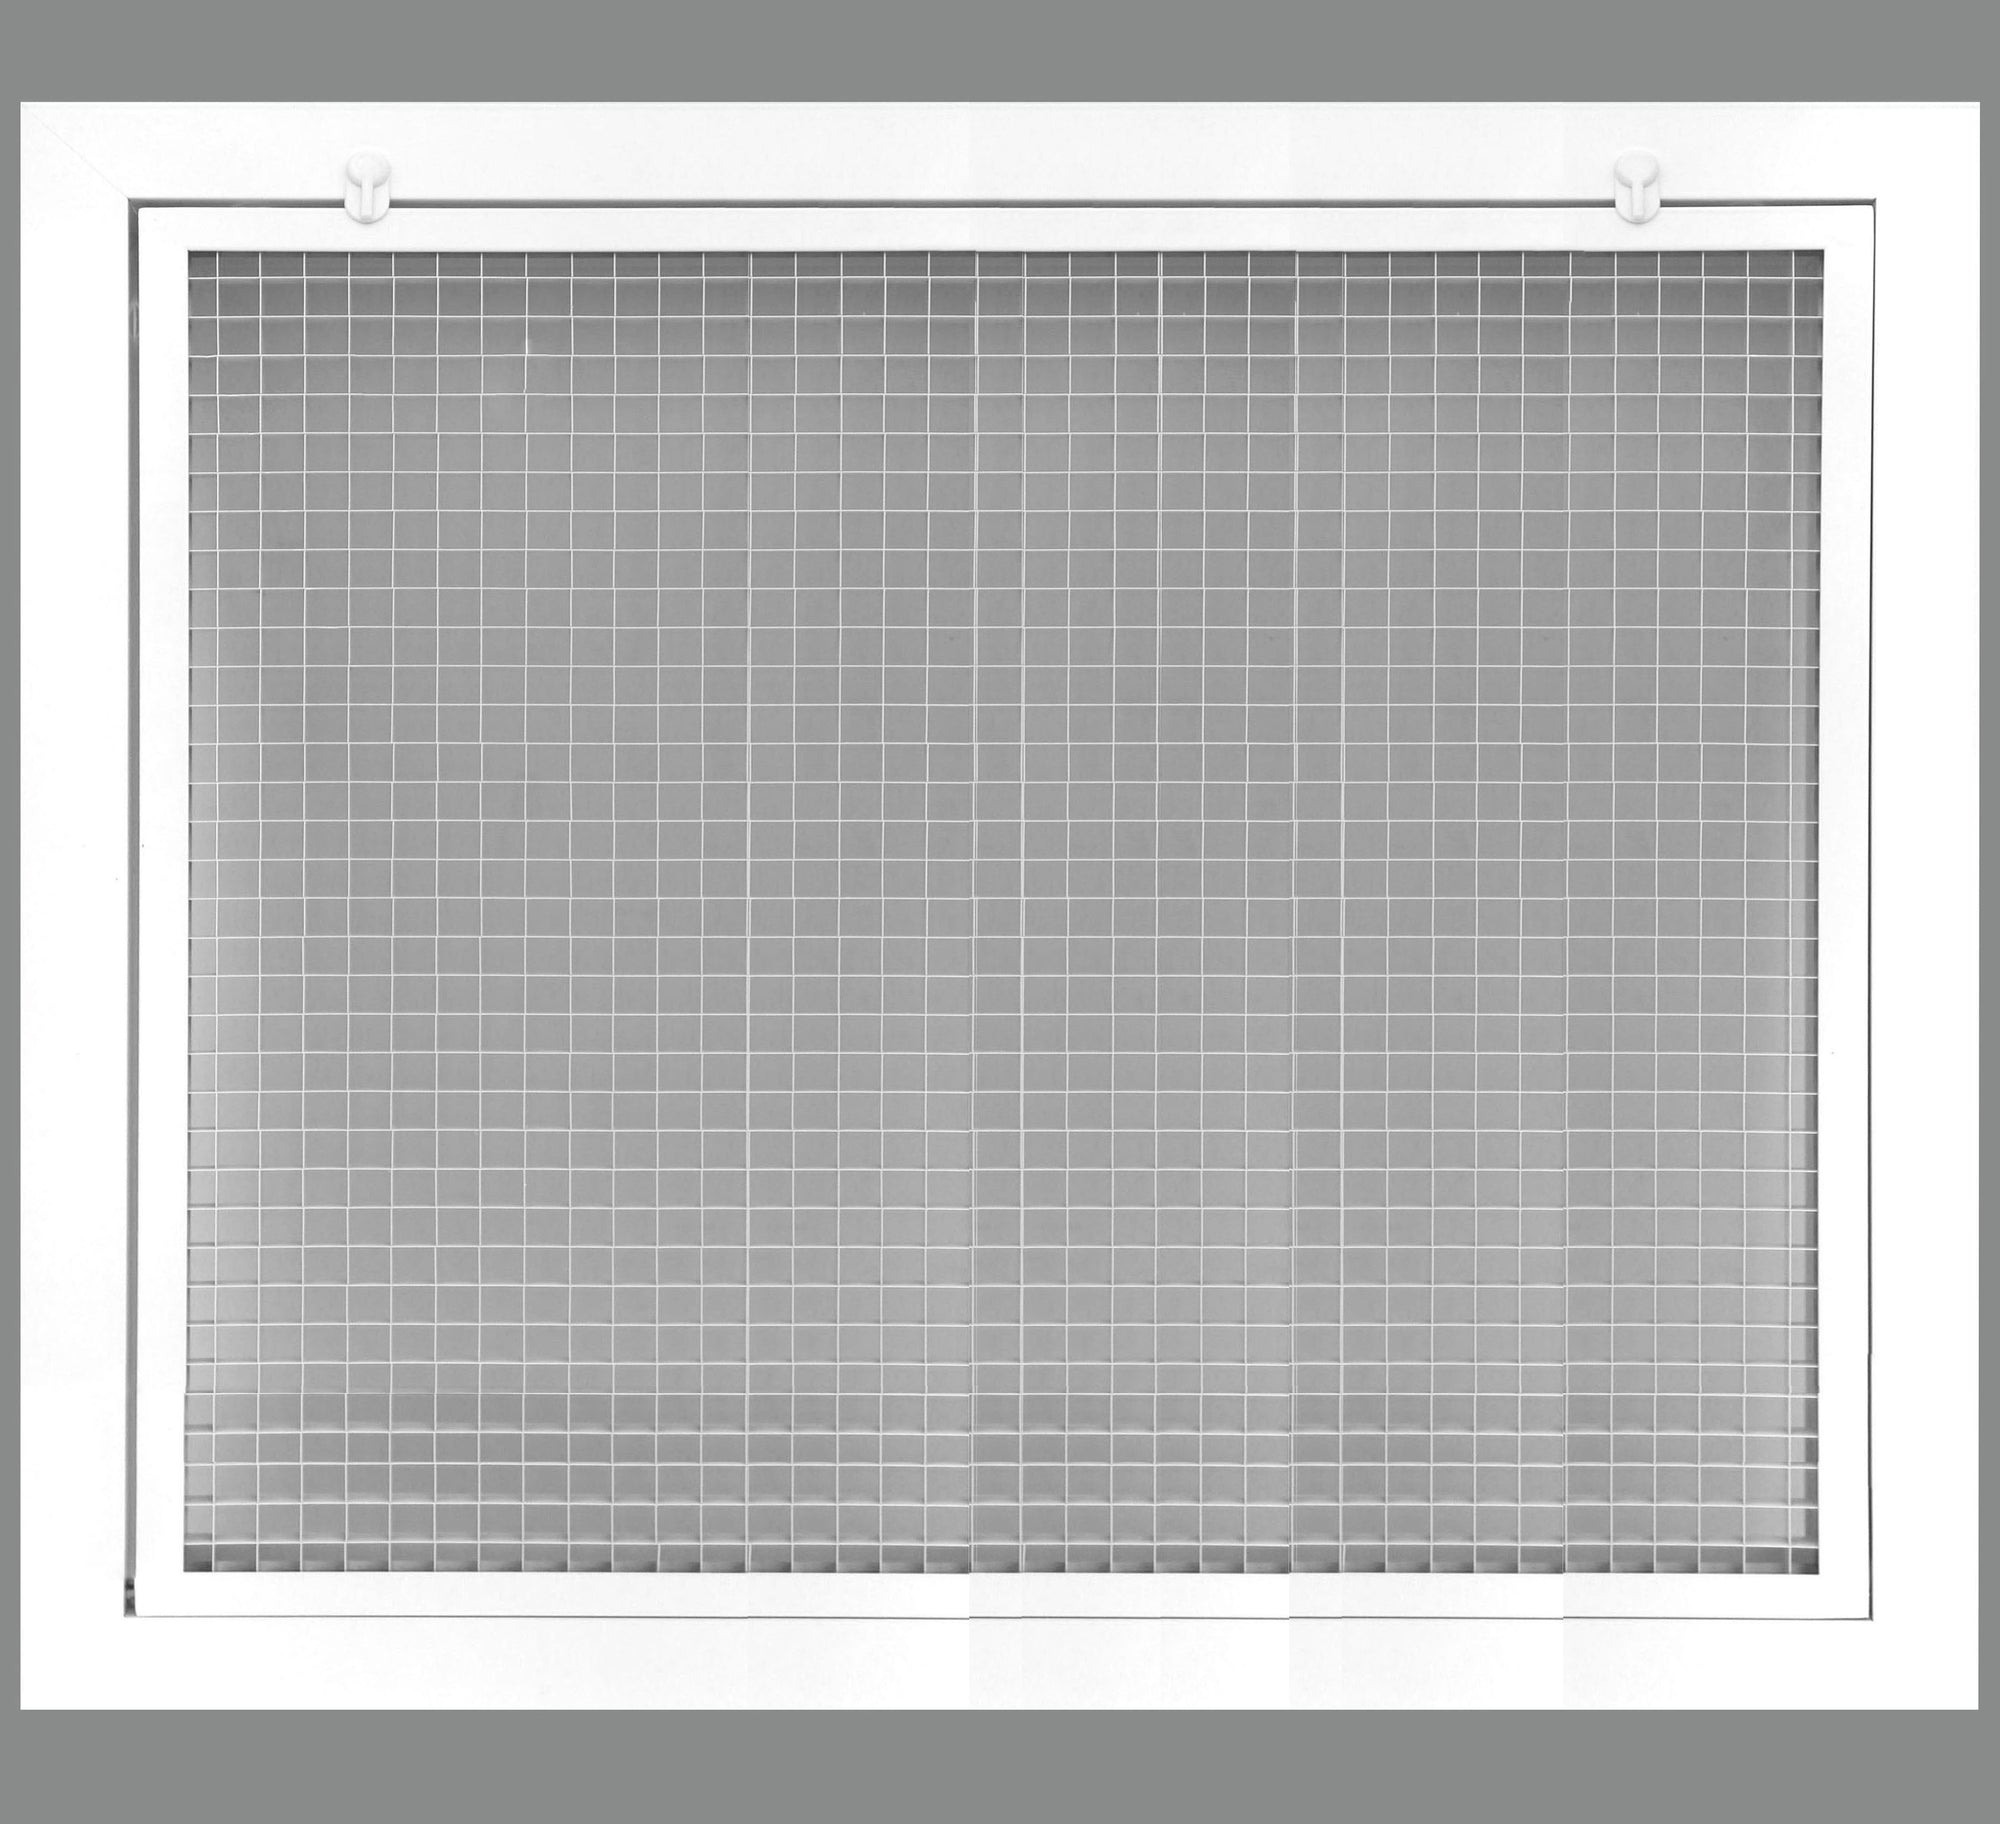 26" x 24" Cube Core Eggcrate Return Air Filter Grille for 1" Filter